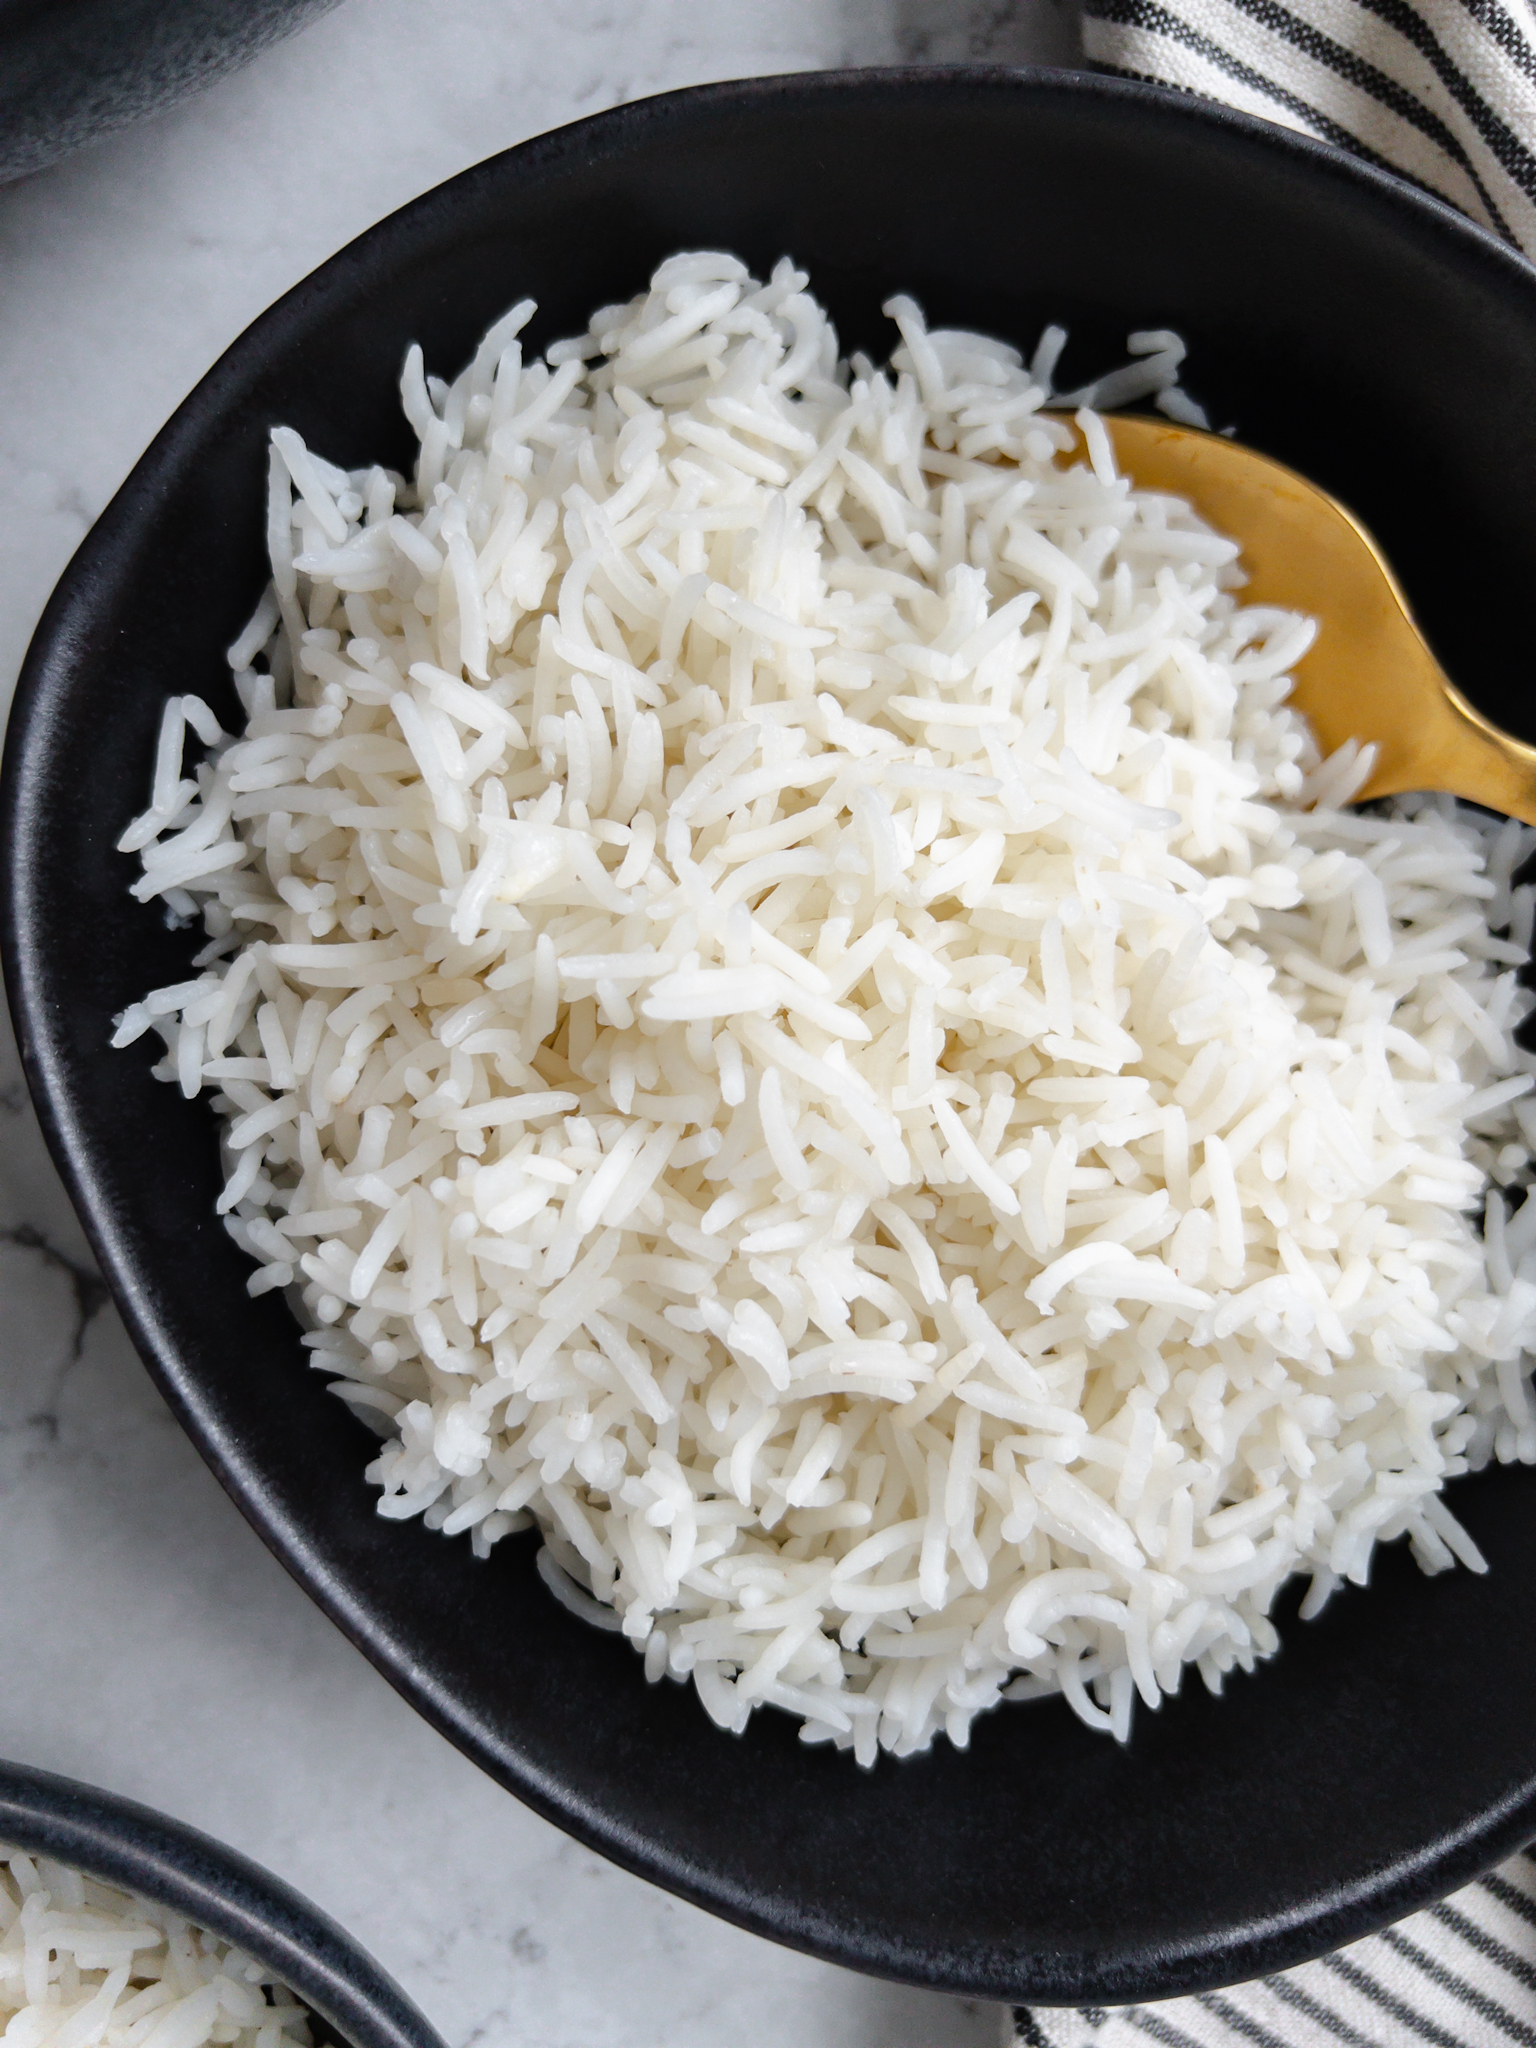 The best way to cook rice - less arsenic